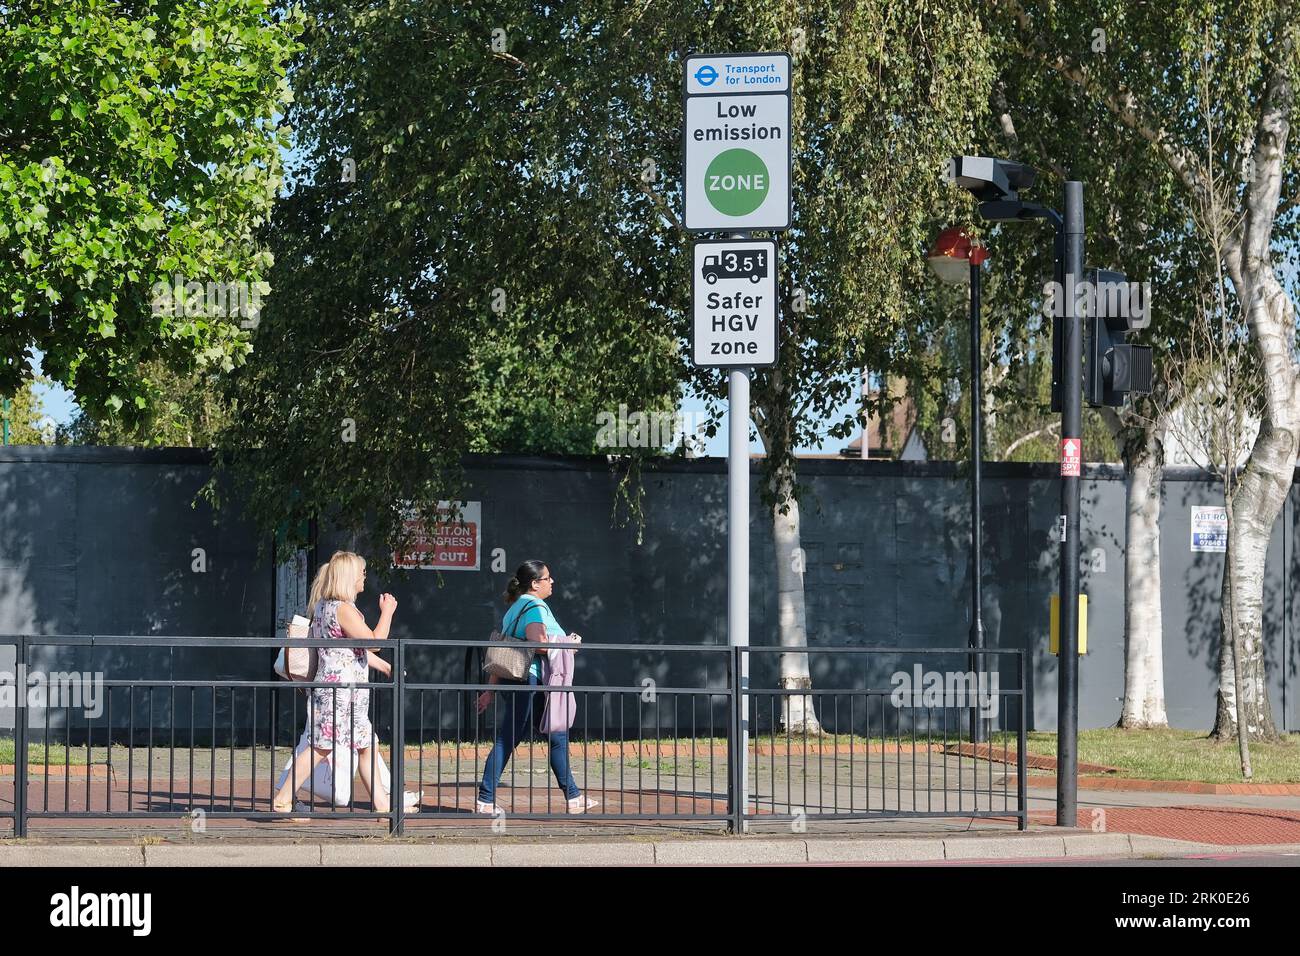 London, UK. Pedestrians walk past a Low Emission Zone sign in south-west London. Stock Photo